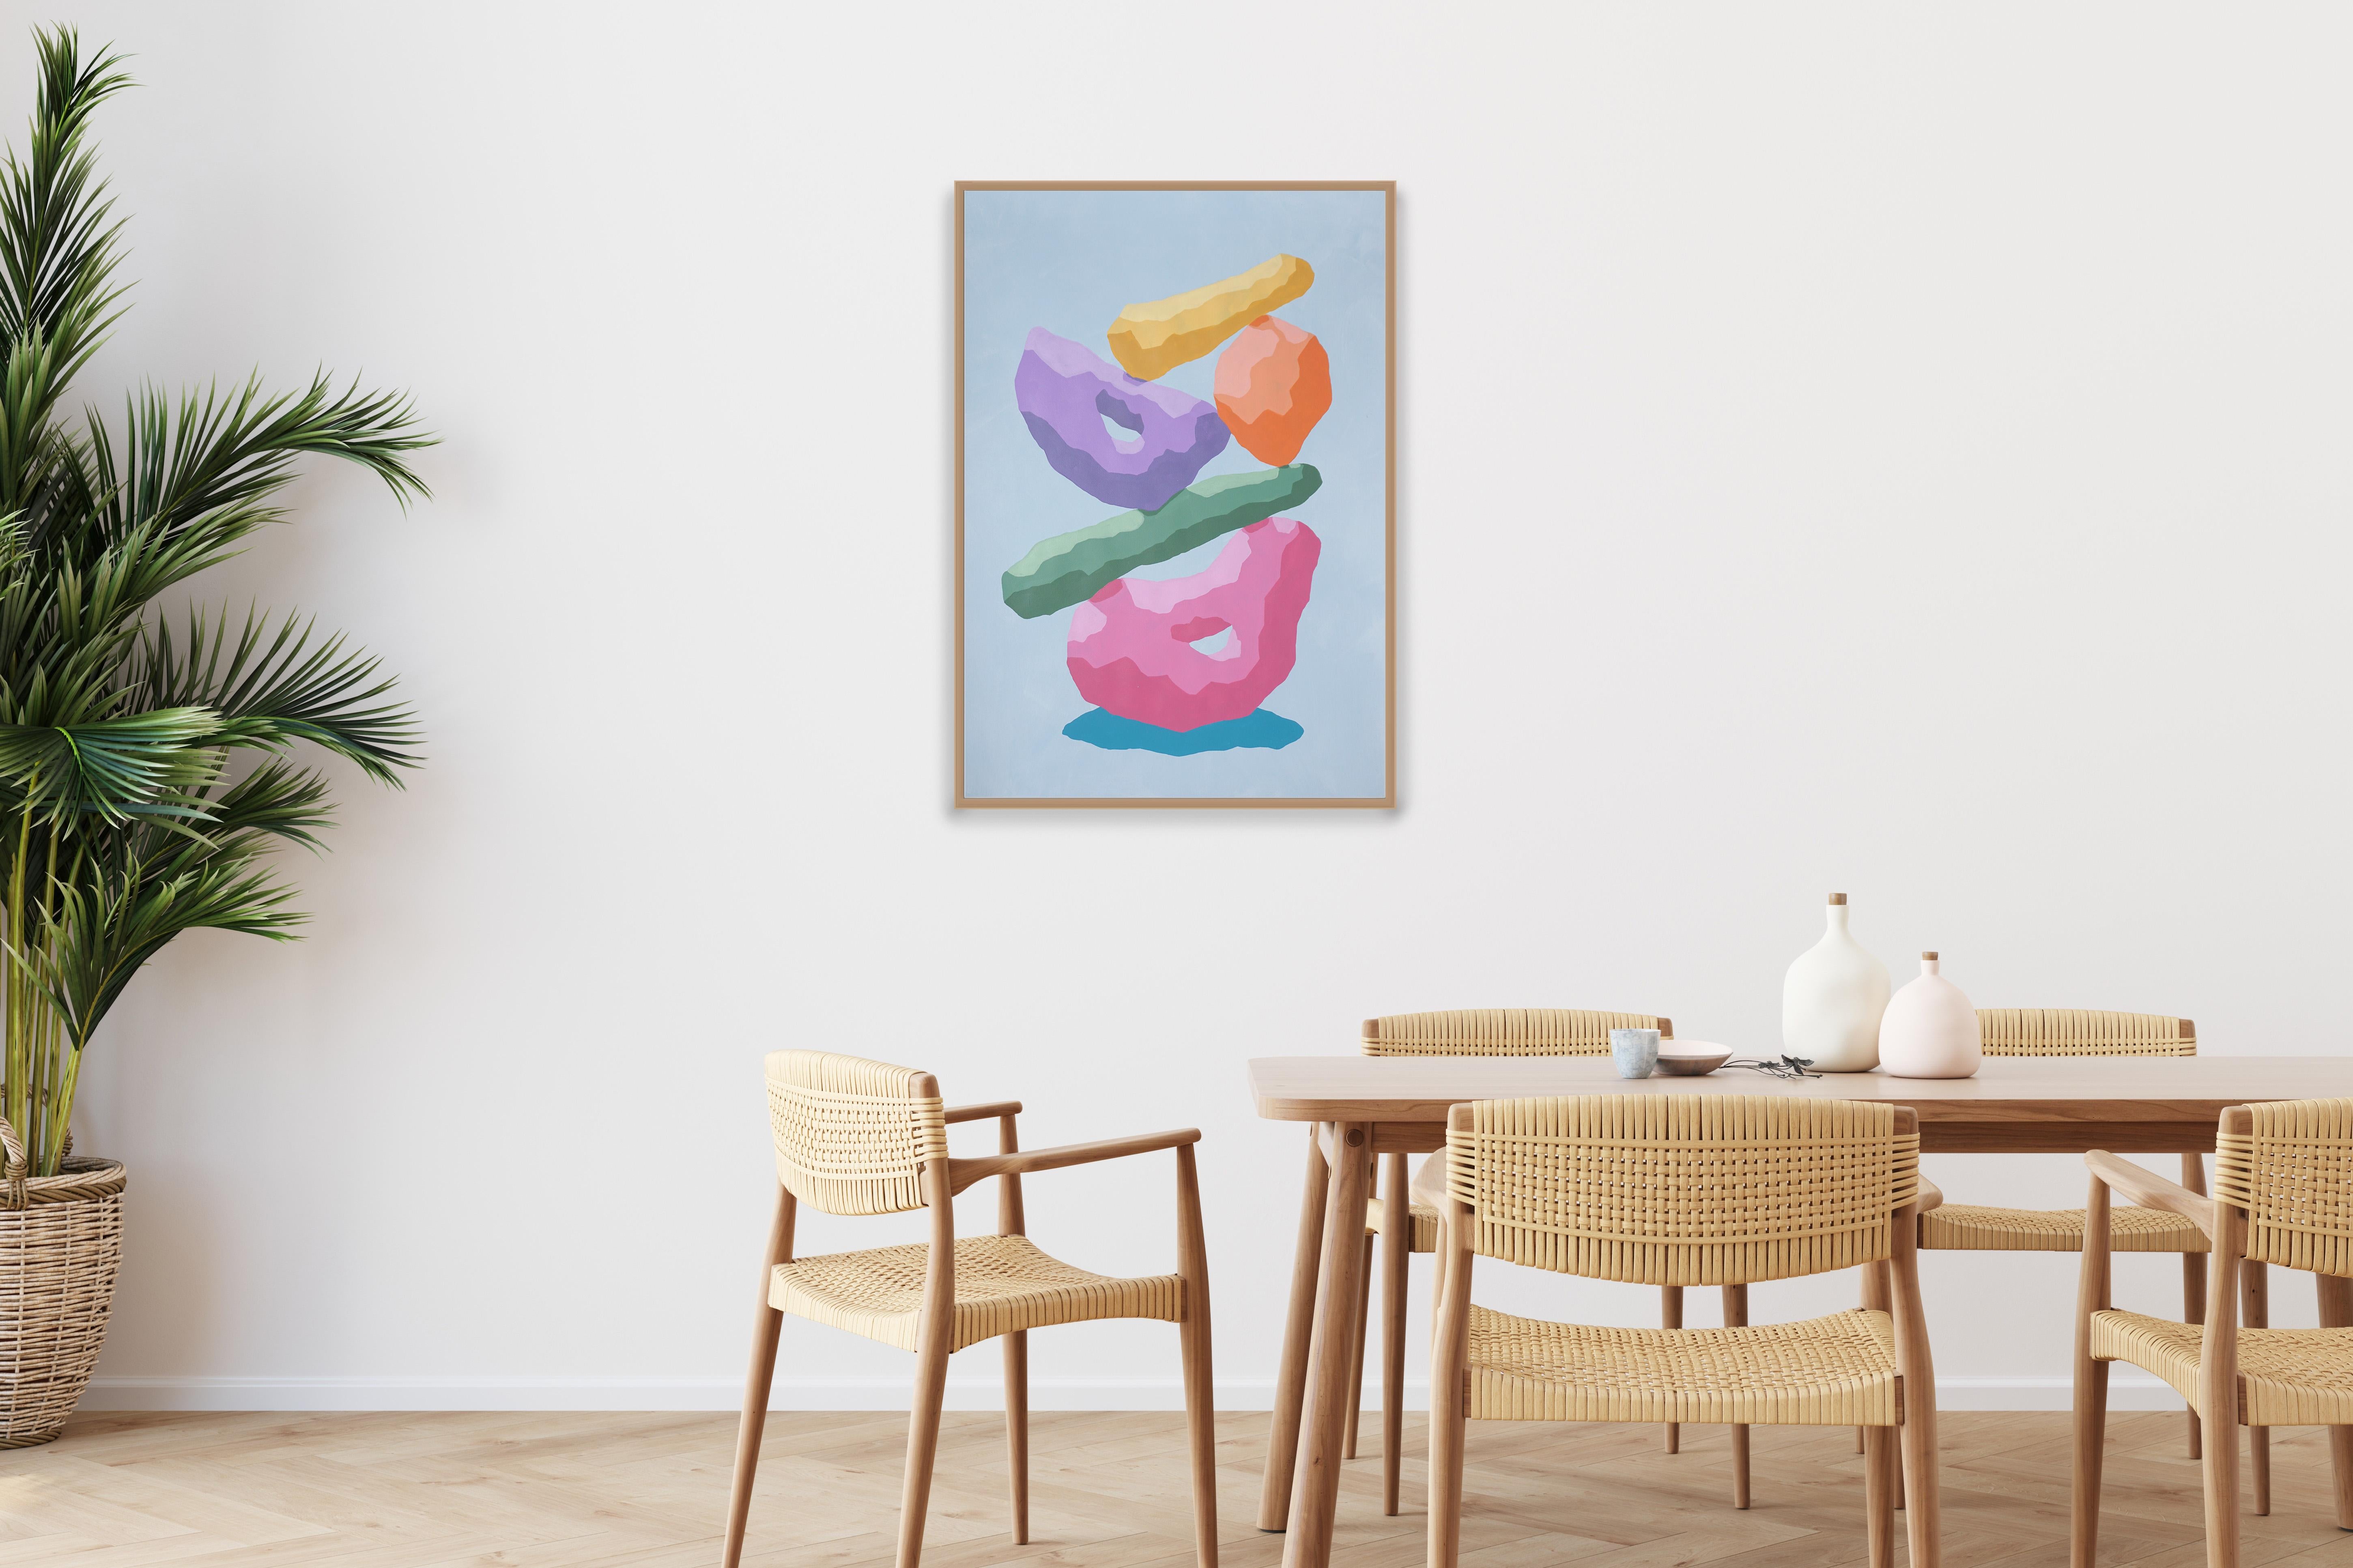 Rainbow Totem, Pastel Tones 3D Render Style Sculpture, Pink, Blue, Yellow Shapes - Painting by Ryan Rivadeneyra